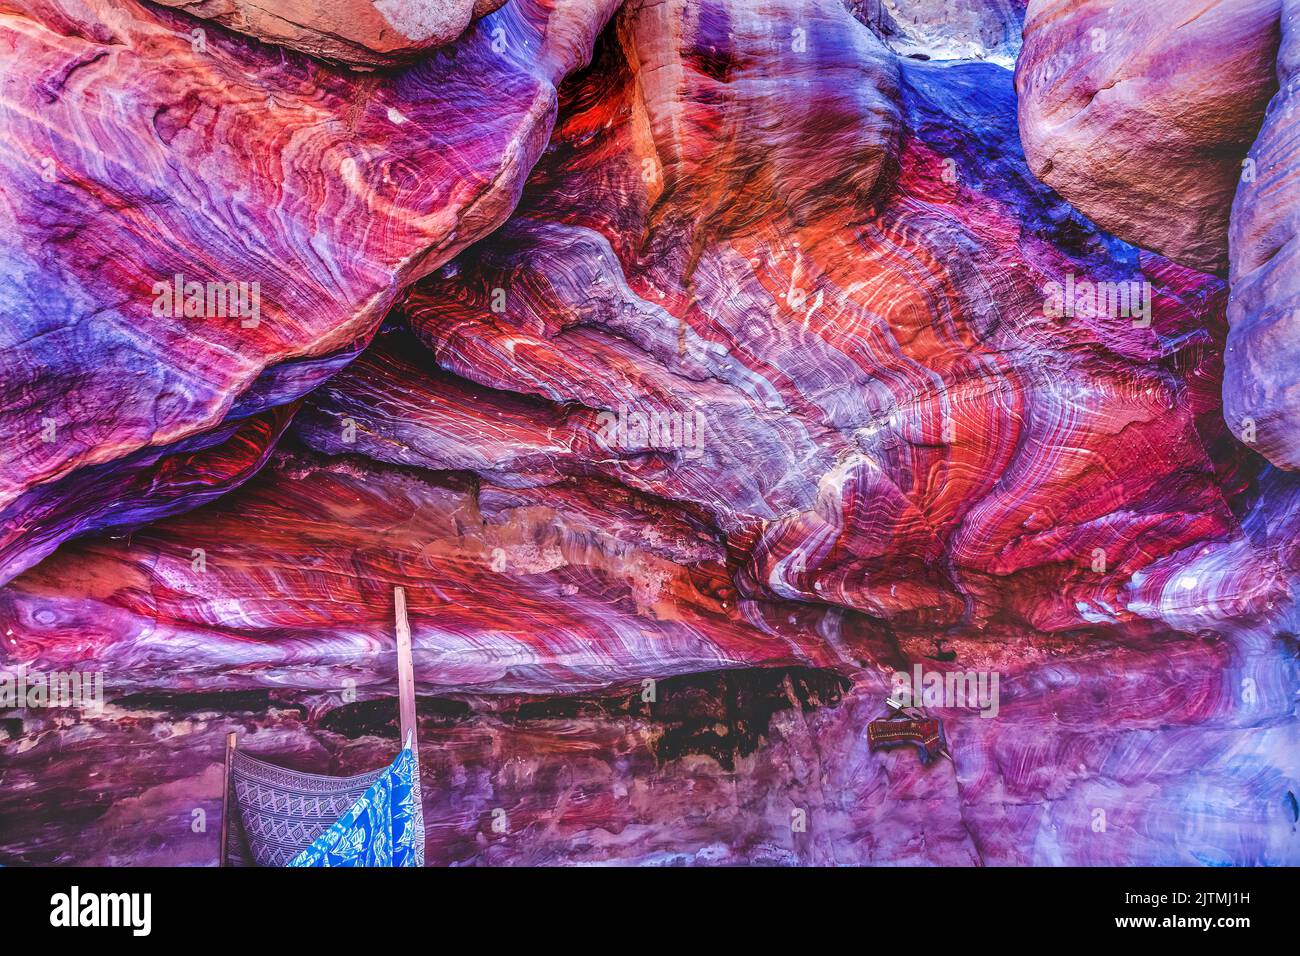 Red Rock Abstract Cave Petra Jordan Built by Nabataens in 200 BC to 400 AD Canyon walls create many abstracts close up Stock Photo